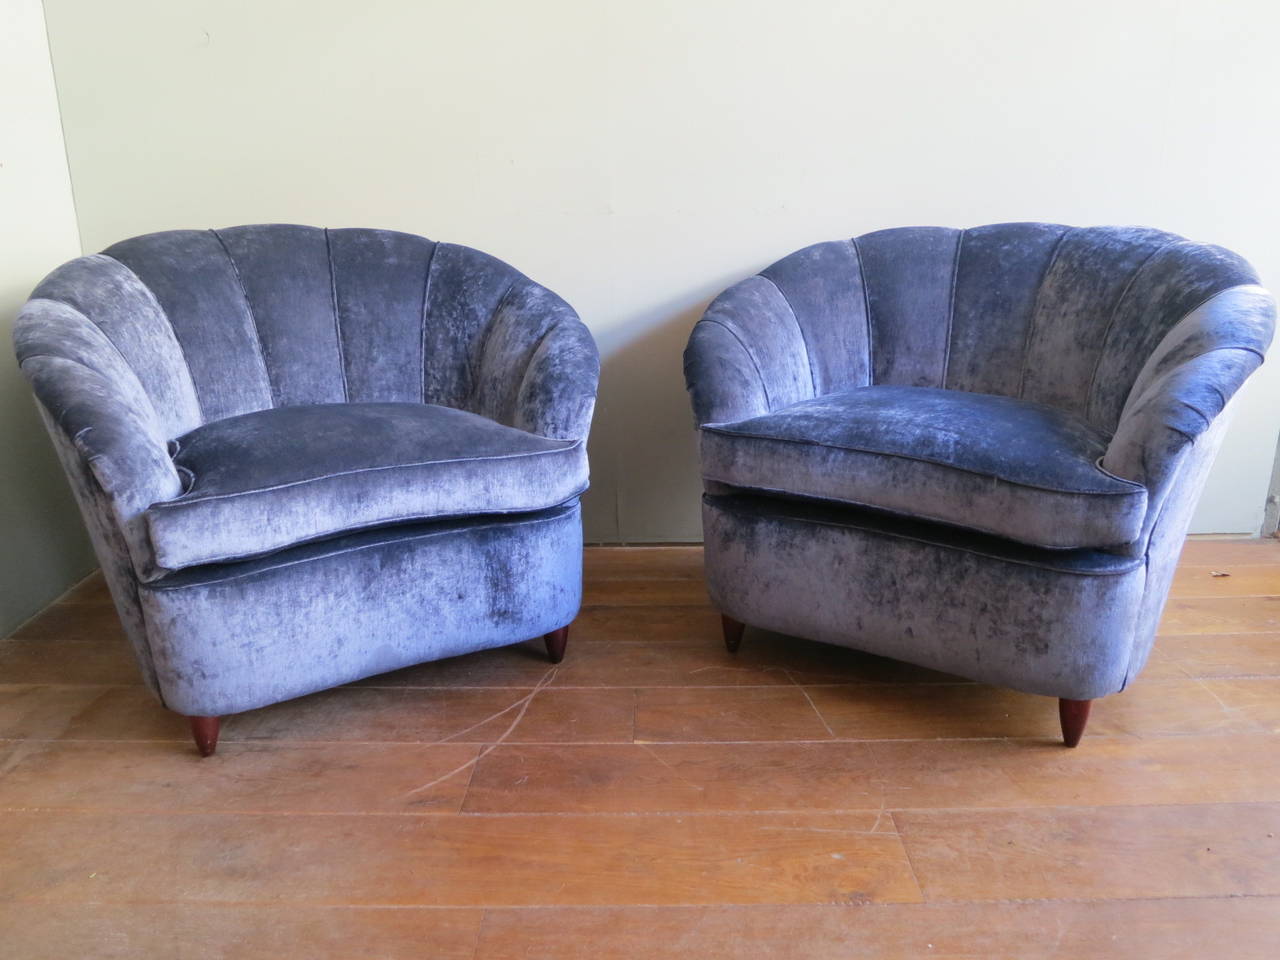 A pair of shell backed tub chairs, expertly reupholstered in crushed blue velvet on conical wooden feet.